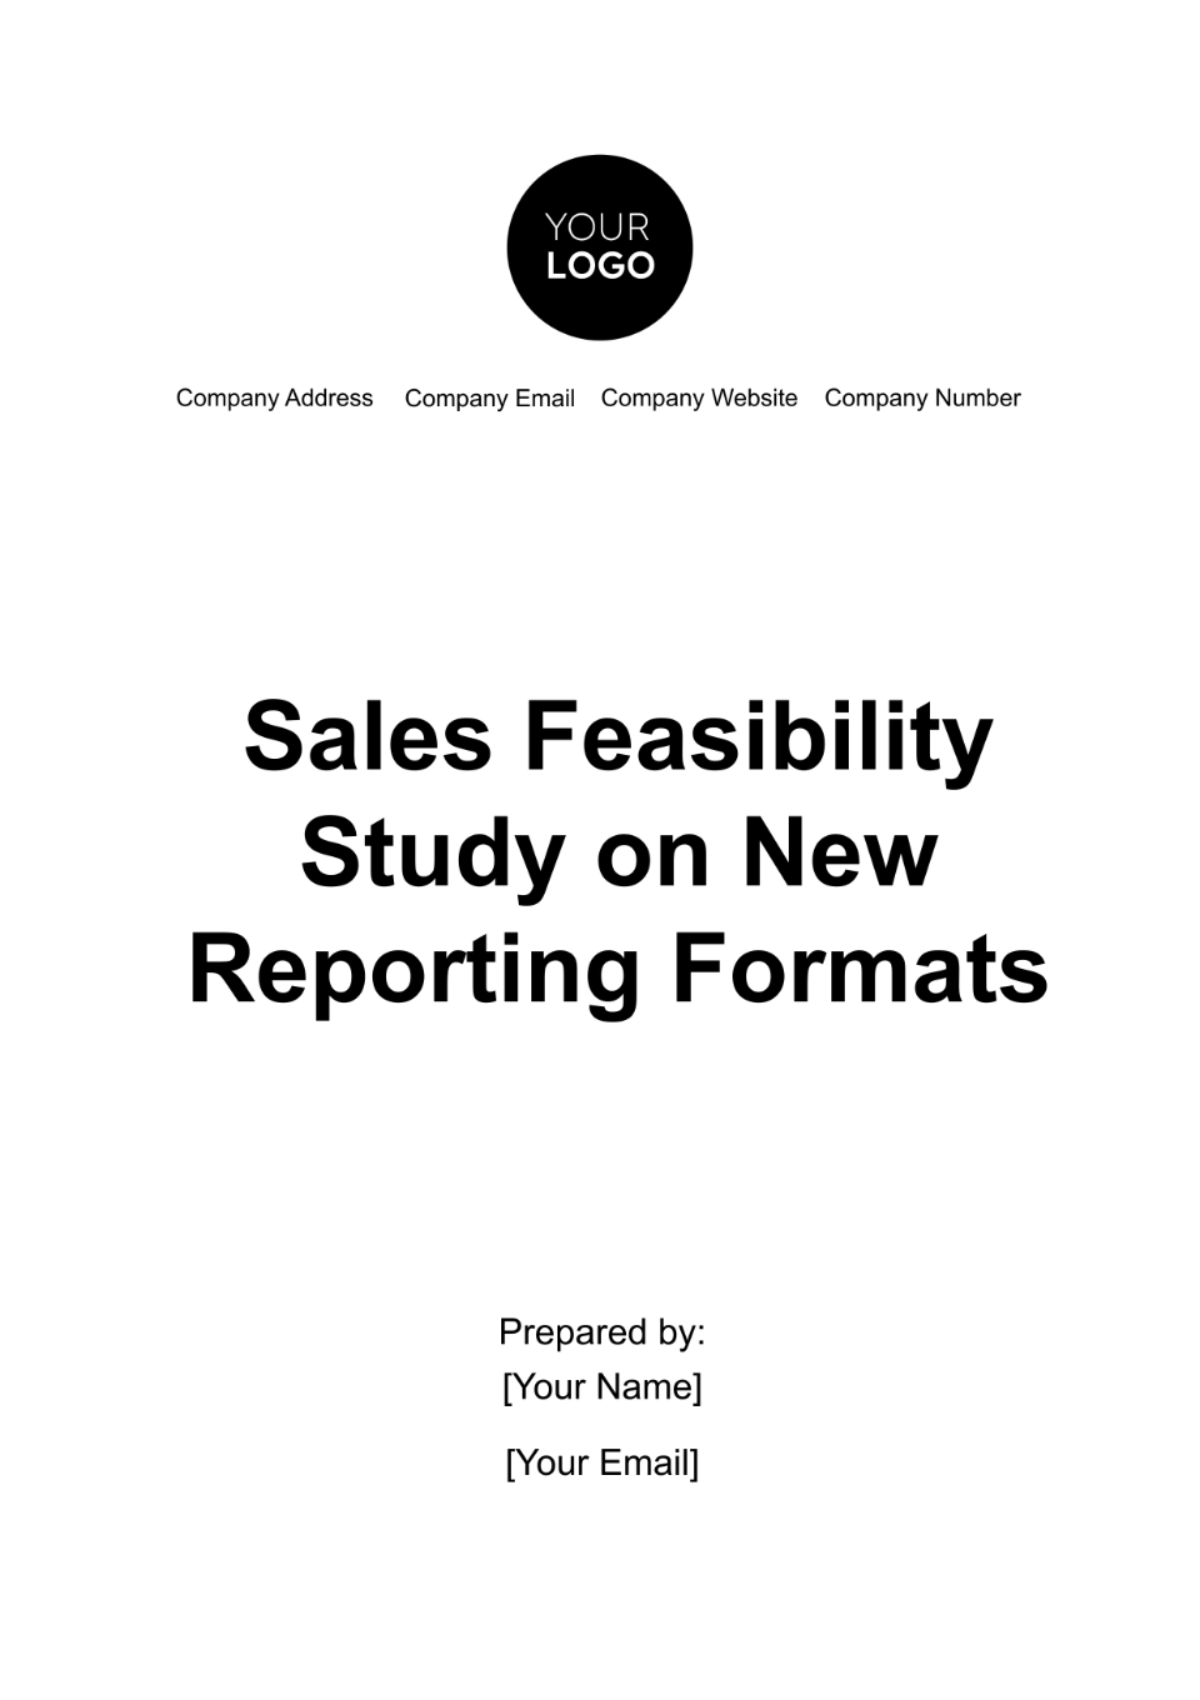 Sales Feasibility Study on New Reporting Formats Template